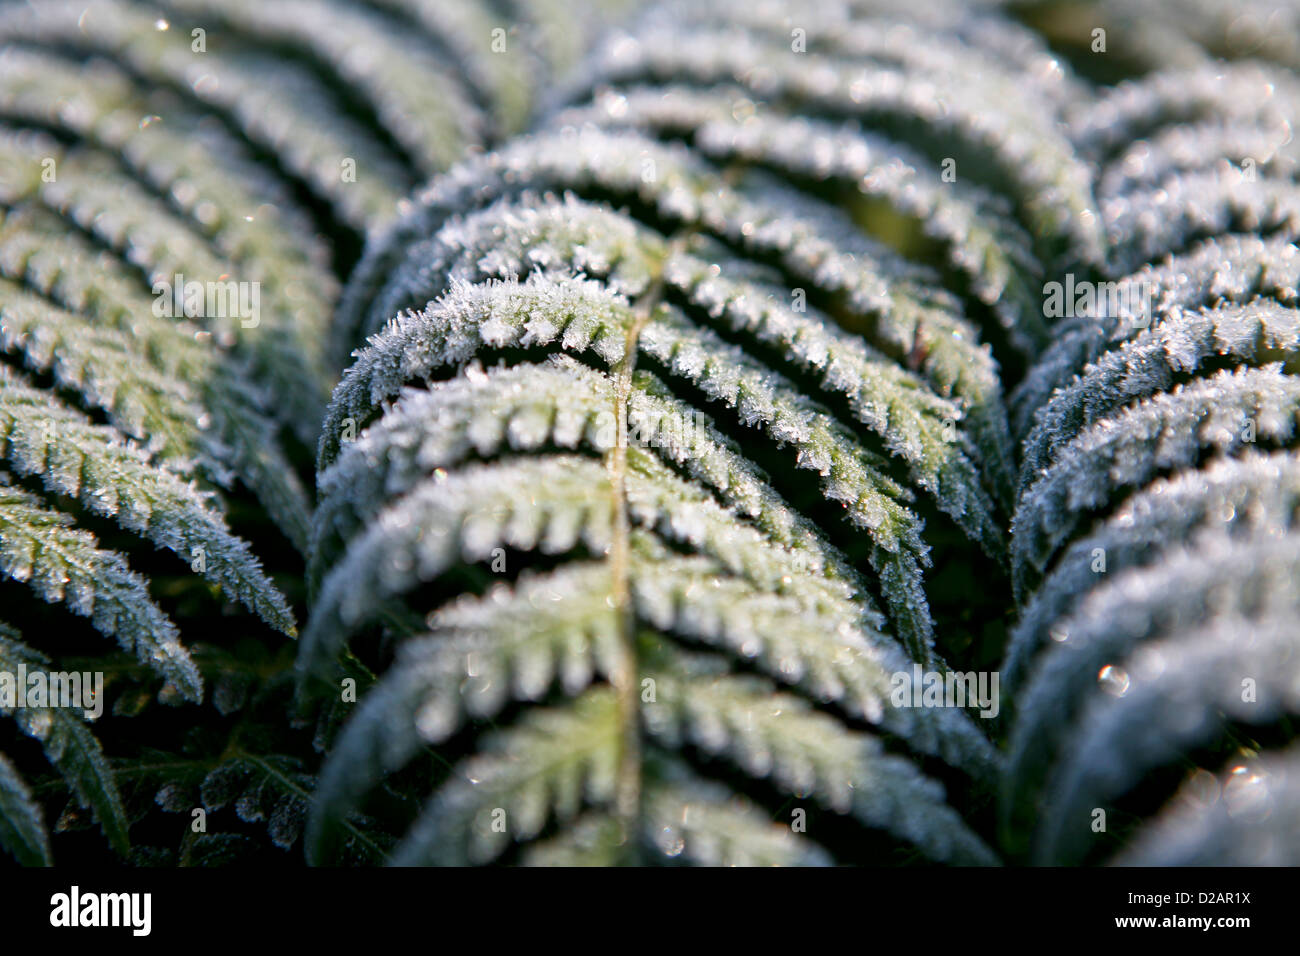 Tree fern (Dicksonia antarctica) fronds covered in frost Stock Photo